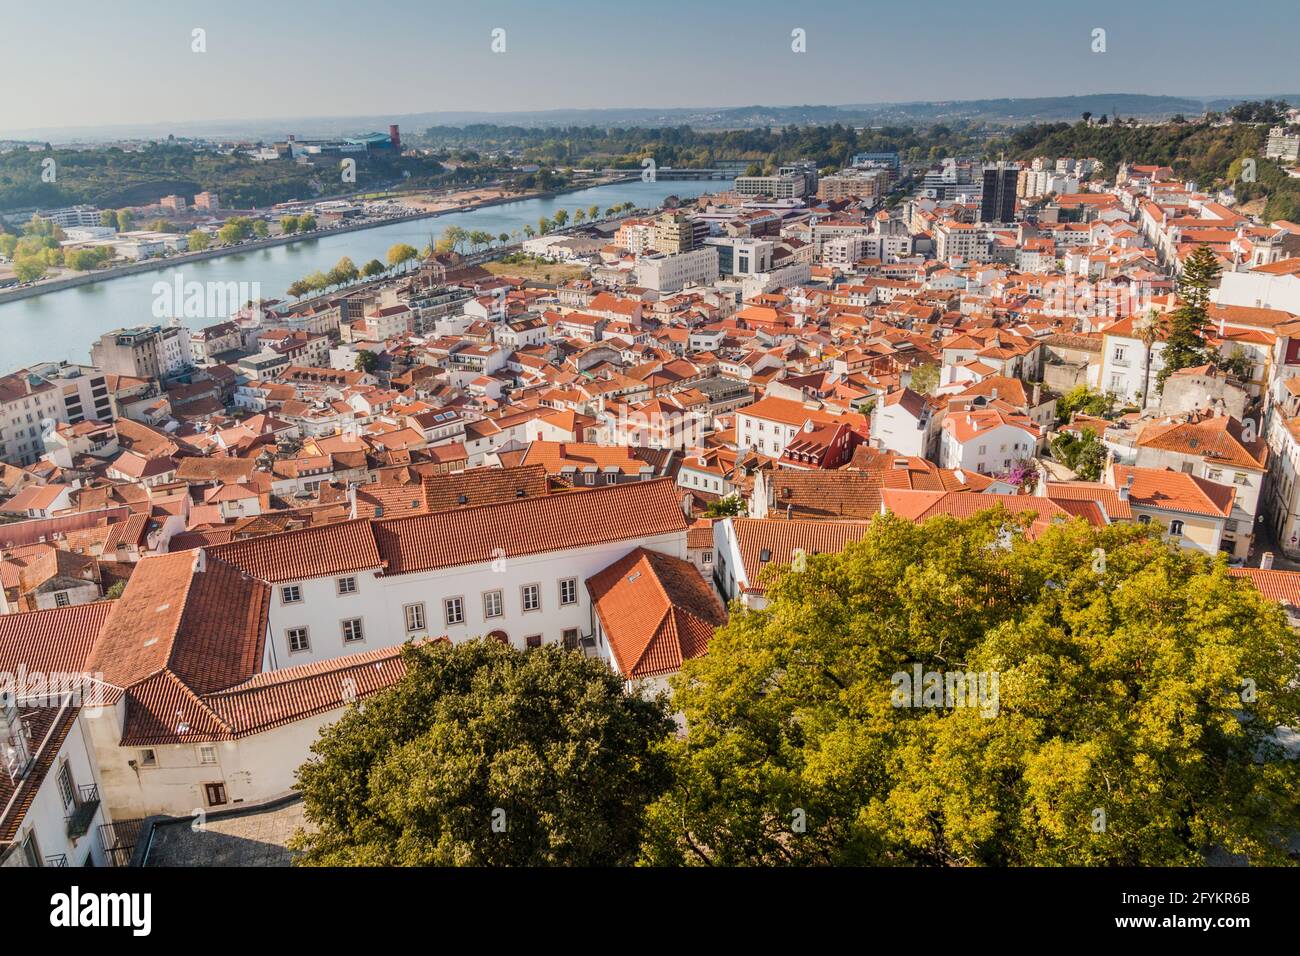 Aerial view of Coimbra, Portugal. Stock Photo